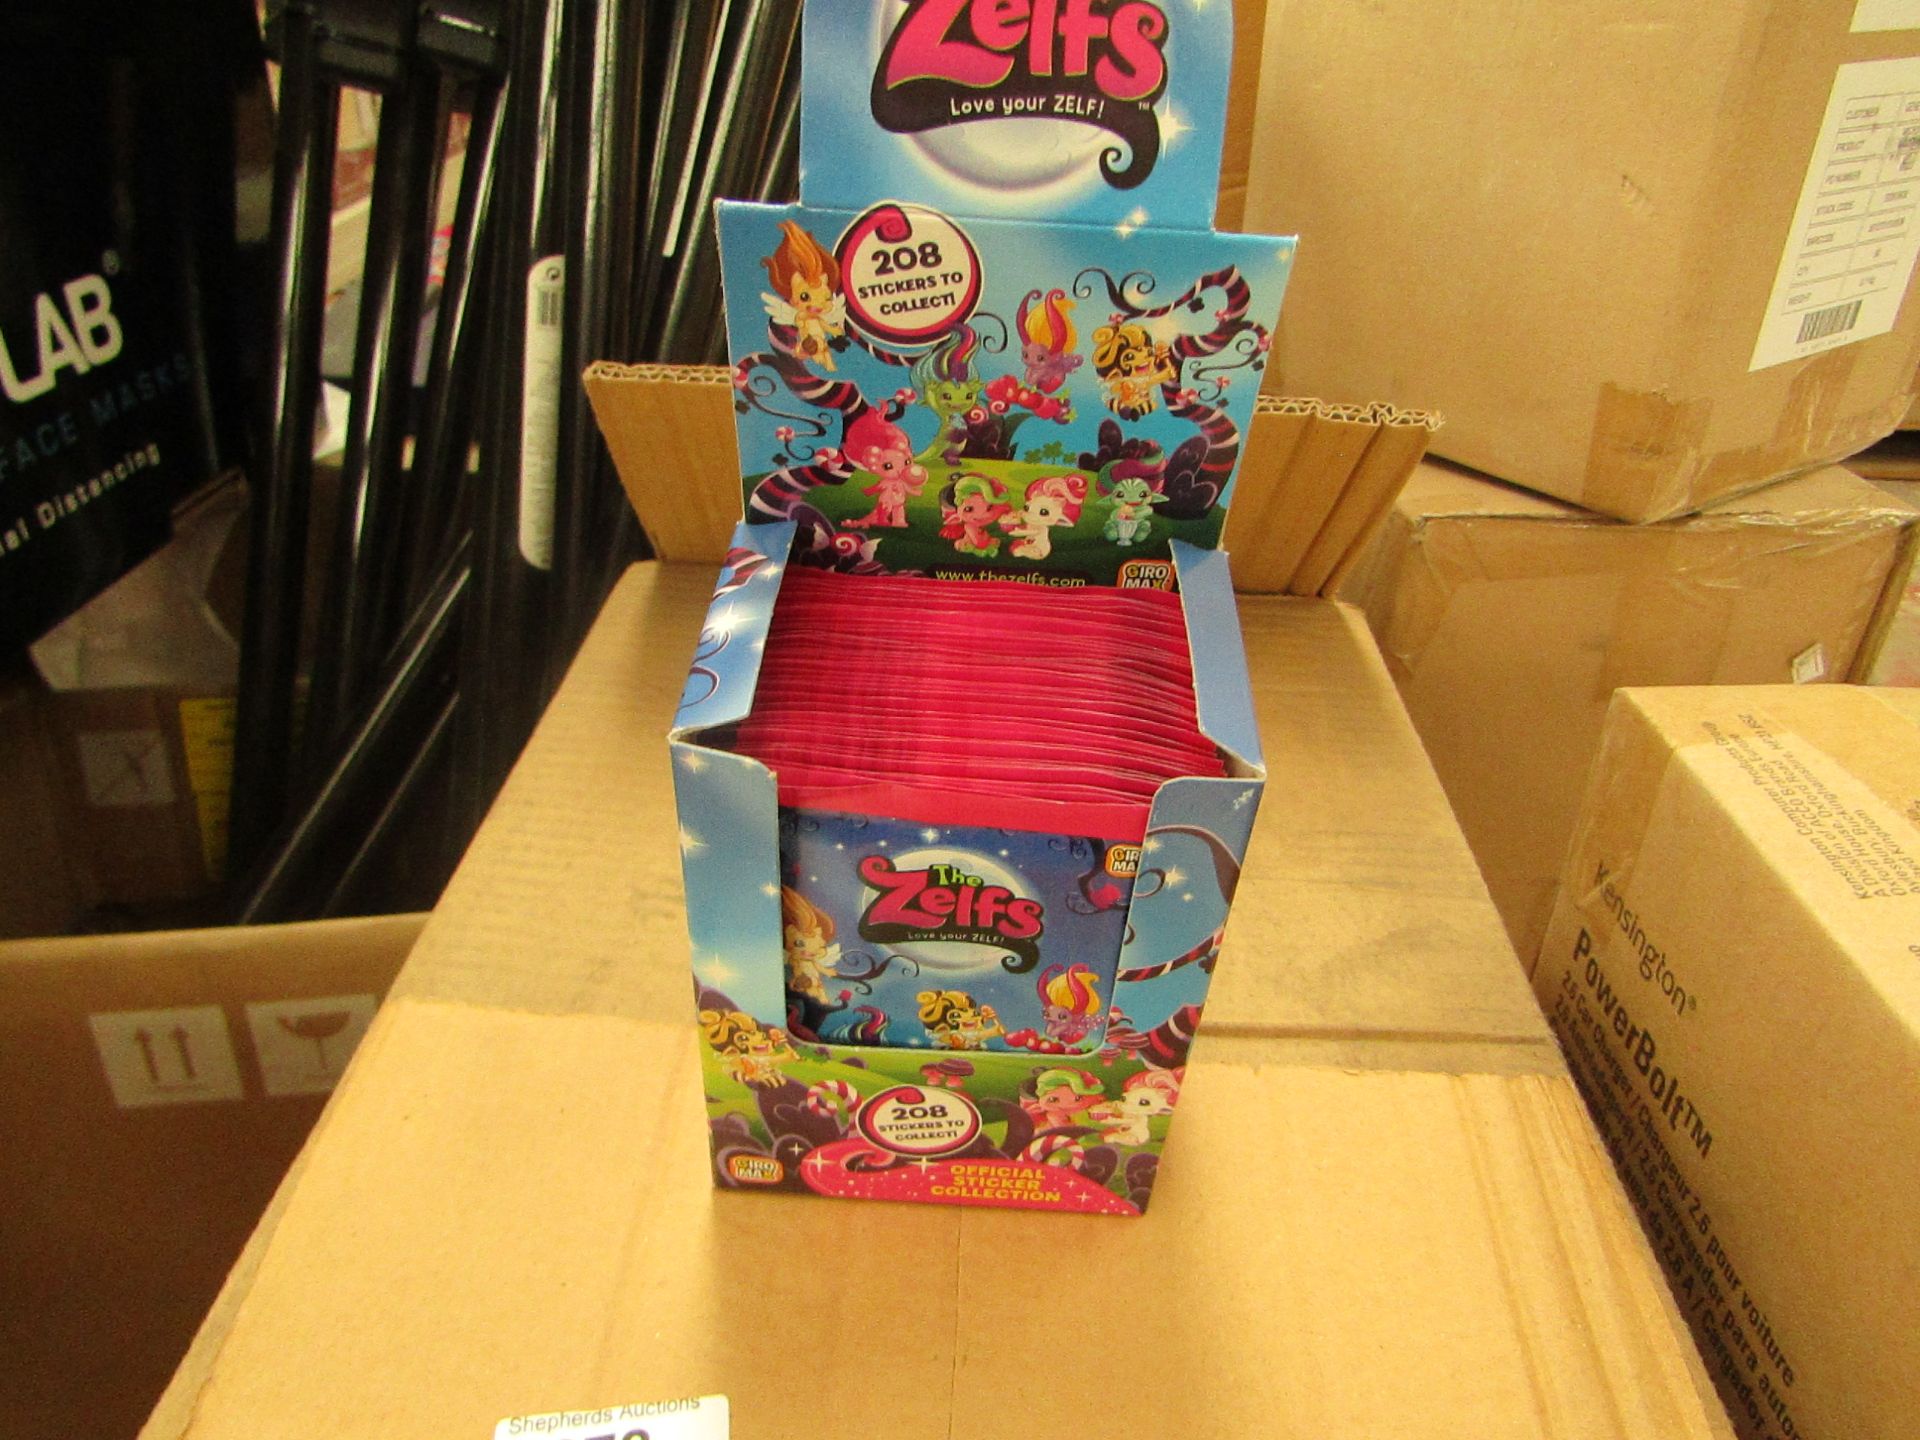 10x Boxes of Zelf Stickers, each box contains 50 packs of stickers, comes in Shop counter POS box.